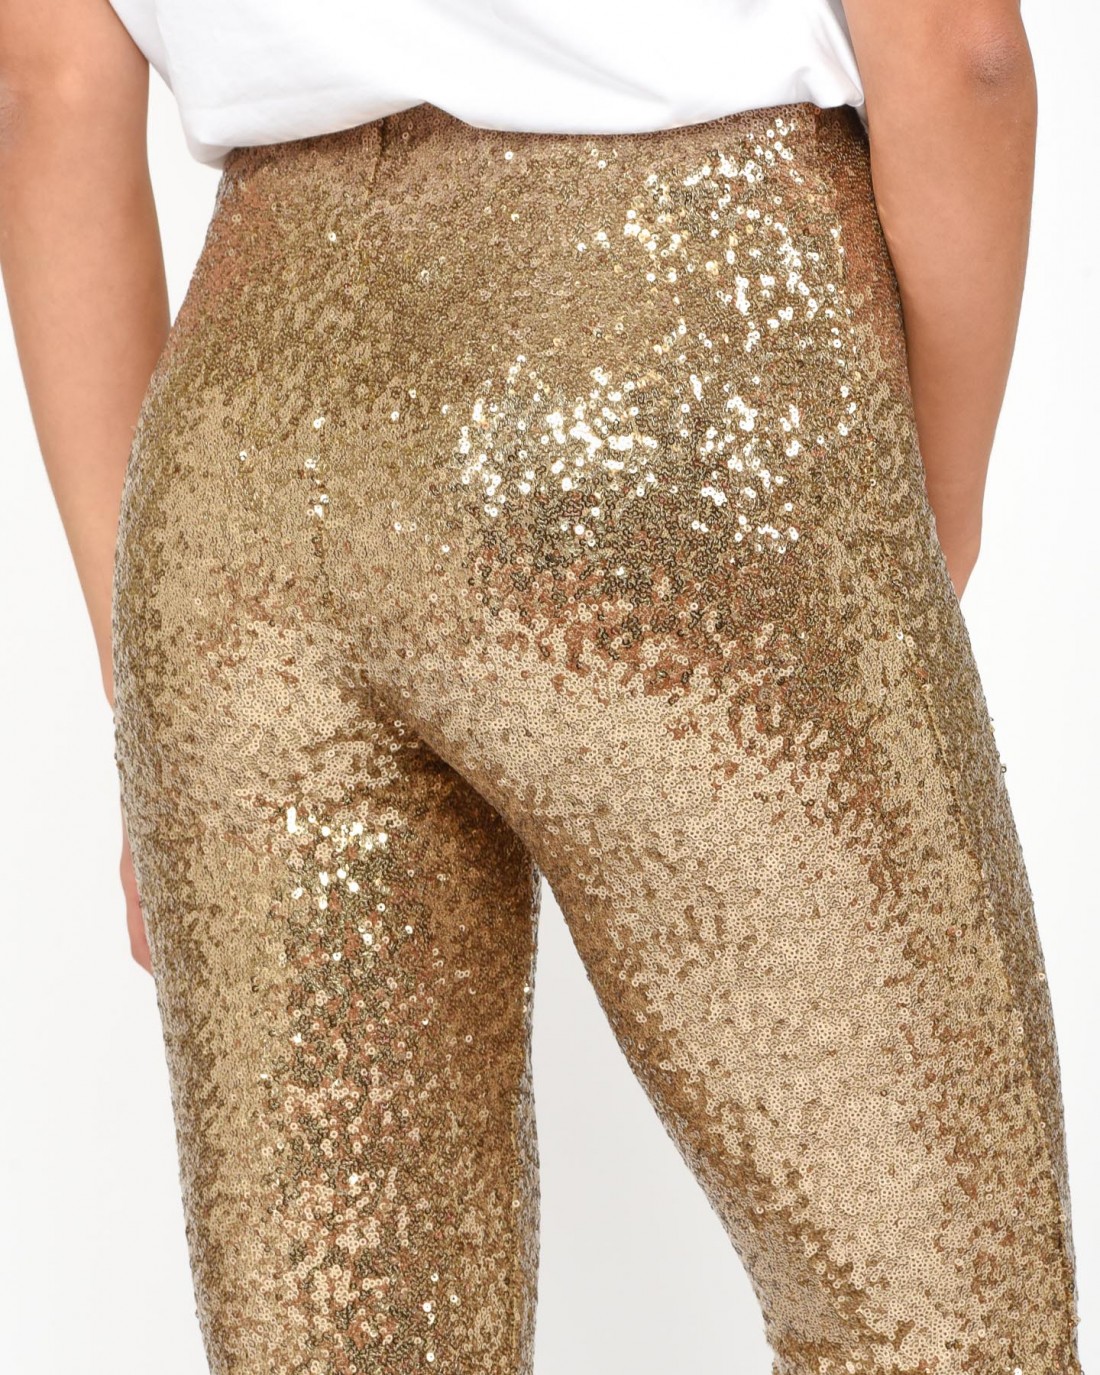 Marc Angelo Chloe High Waist Sequin Trousers in Champagne | iCLOTHING -  iCLOTHING